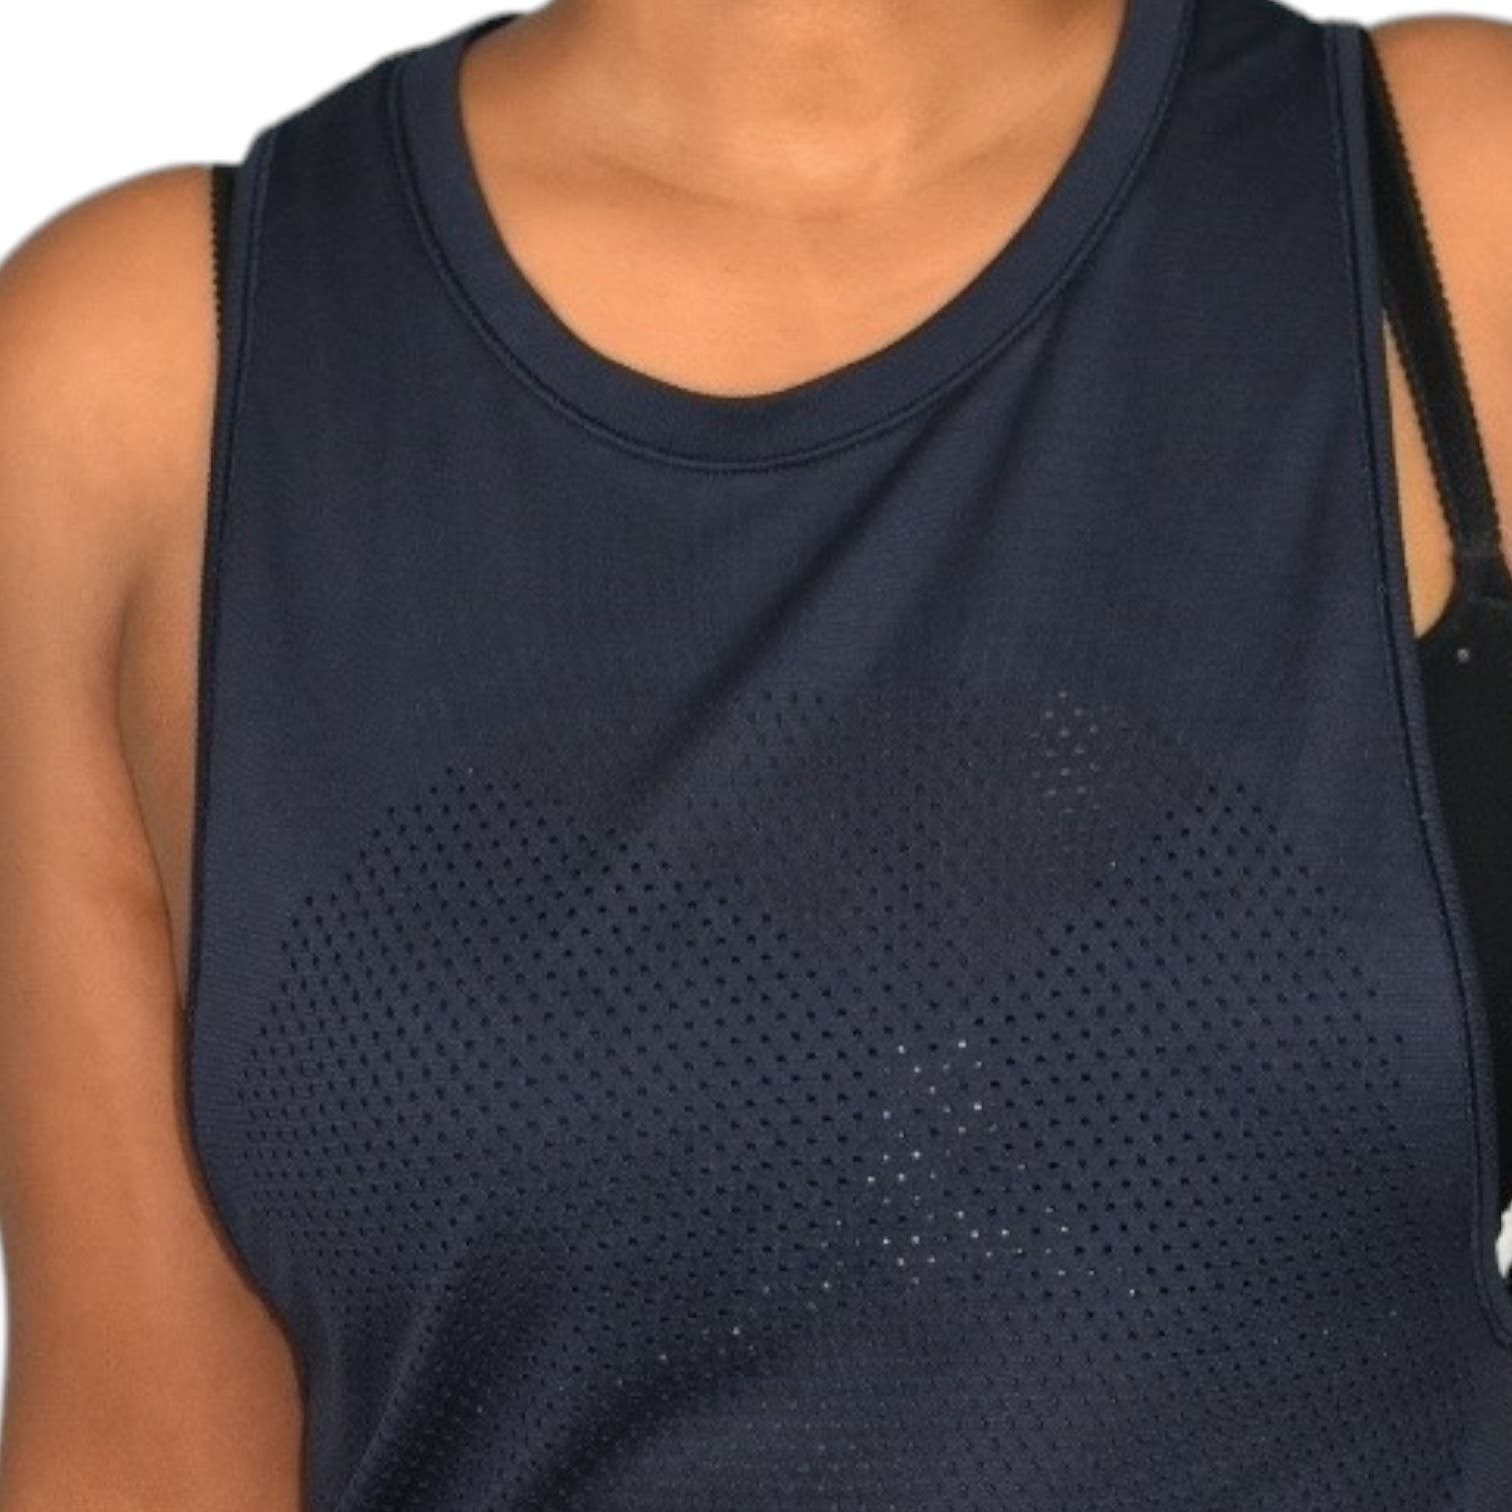 Lululemon Breezy By Muscle Tank Top Blue Navy Perforated Ventilated Open Sides Stretch Run Size Small